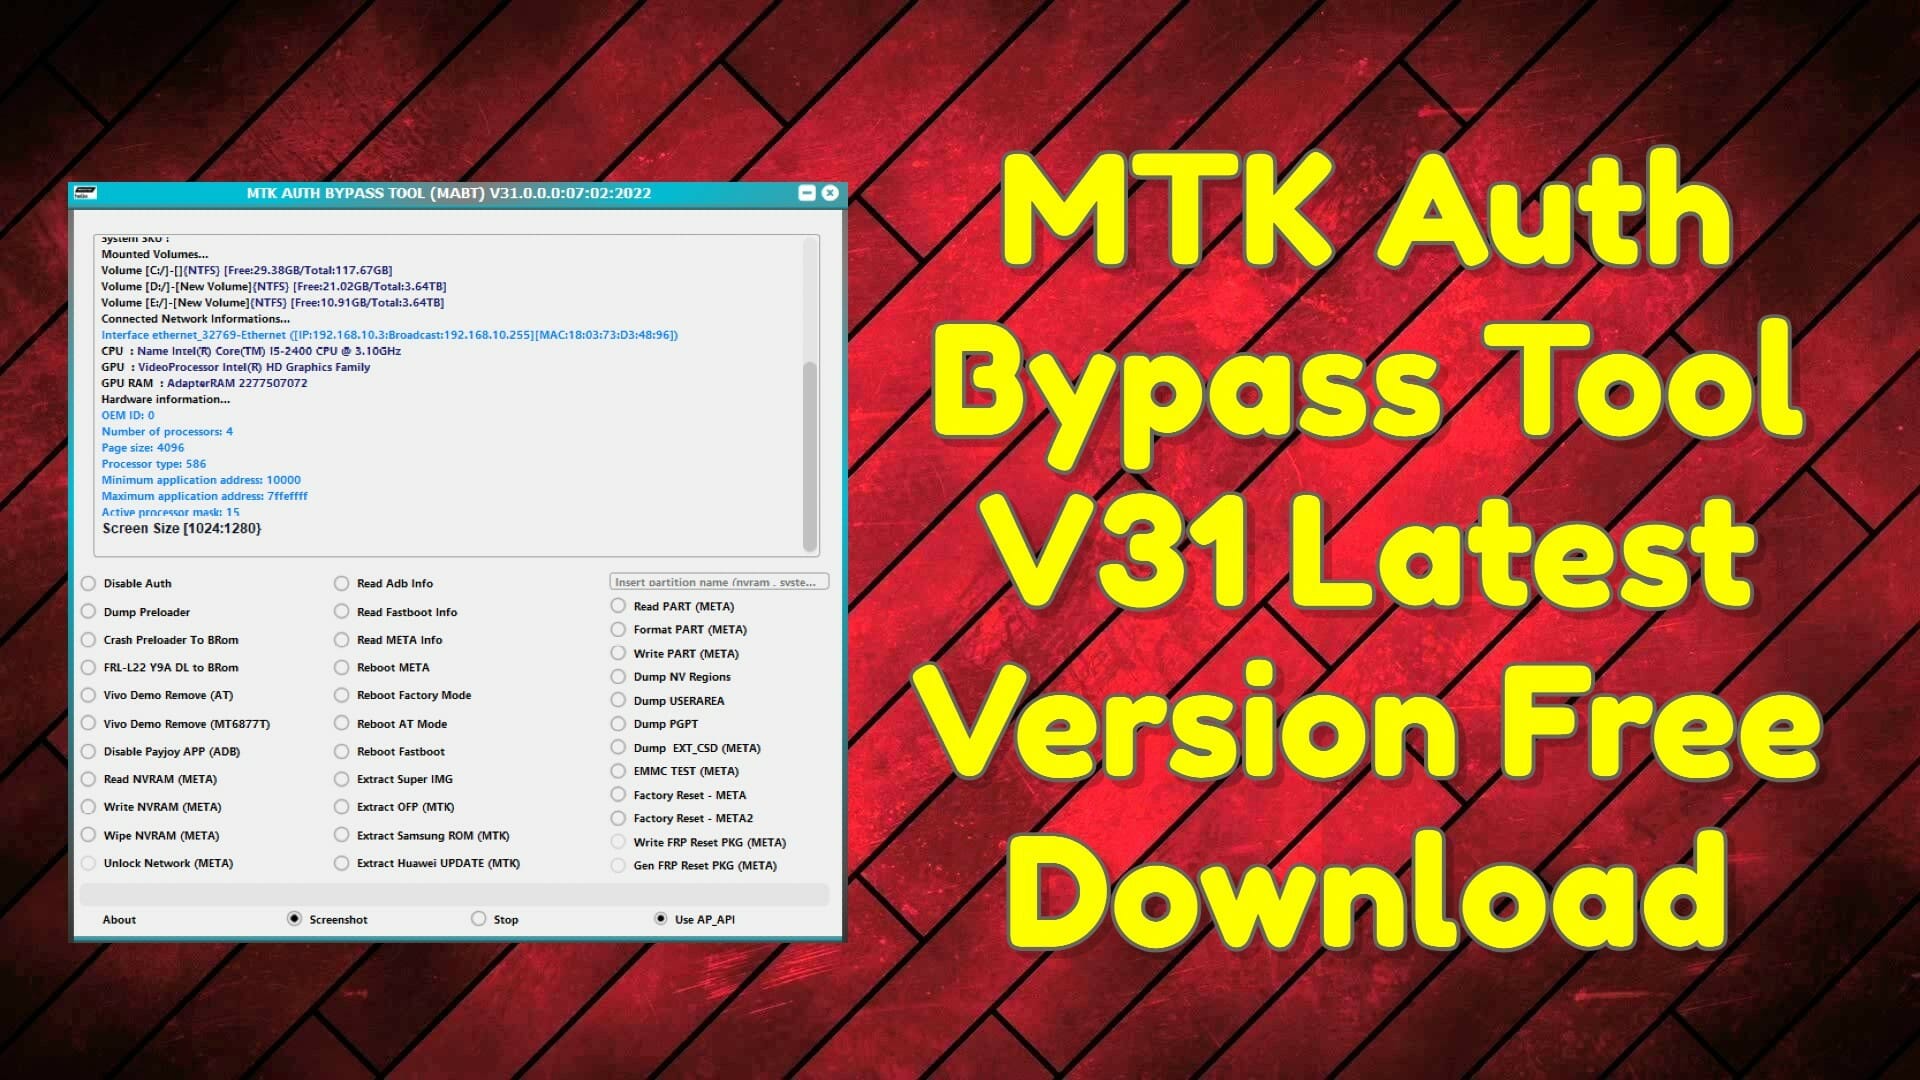 MTK Auth Bypass Tool V31 Latest Version Free Download